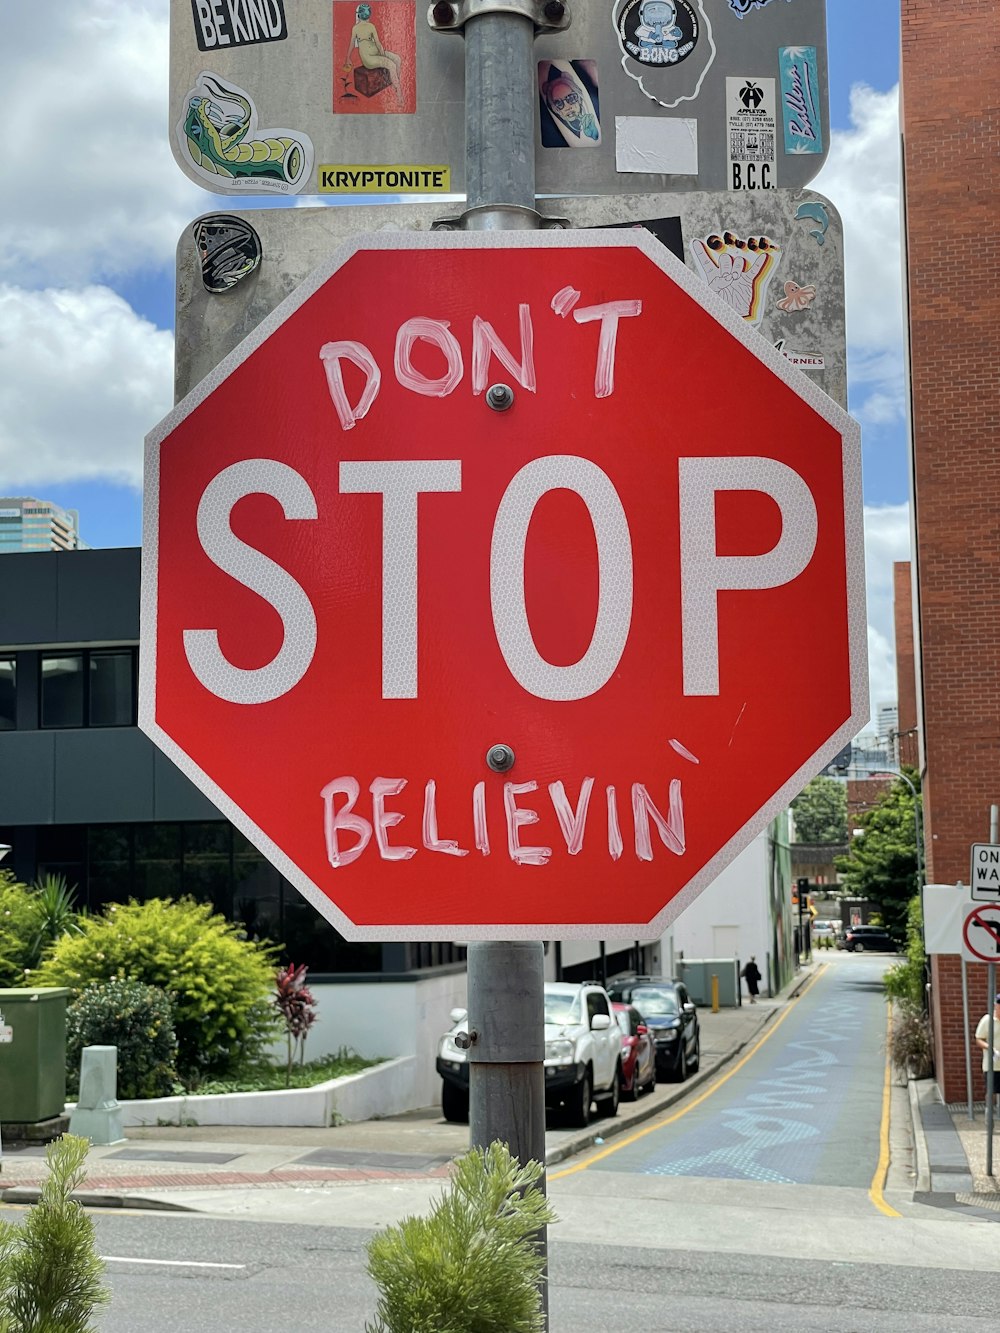 a stop sign has been vandalized with stickers